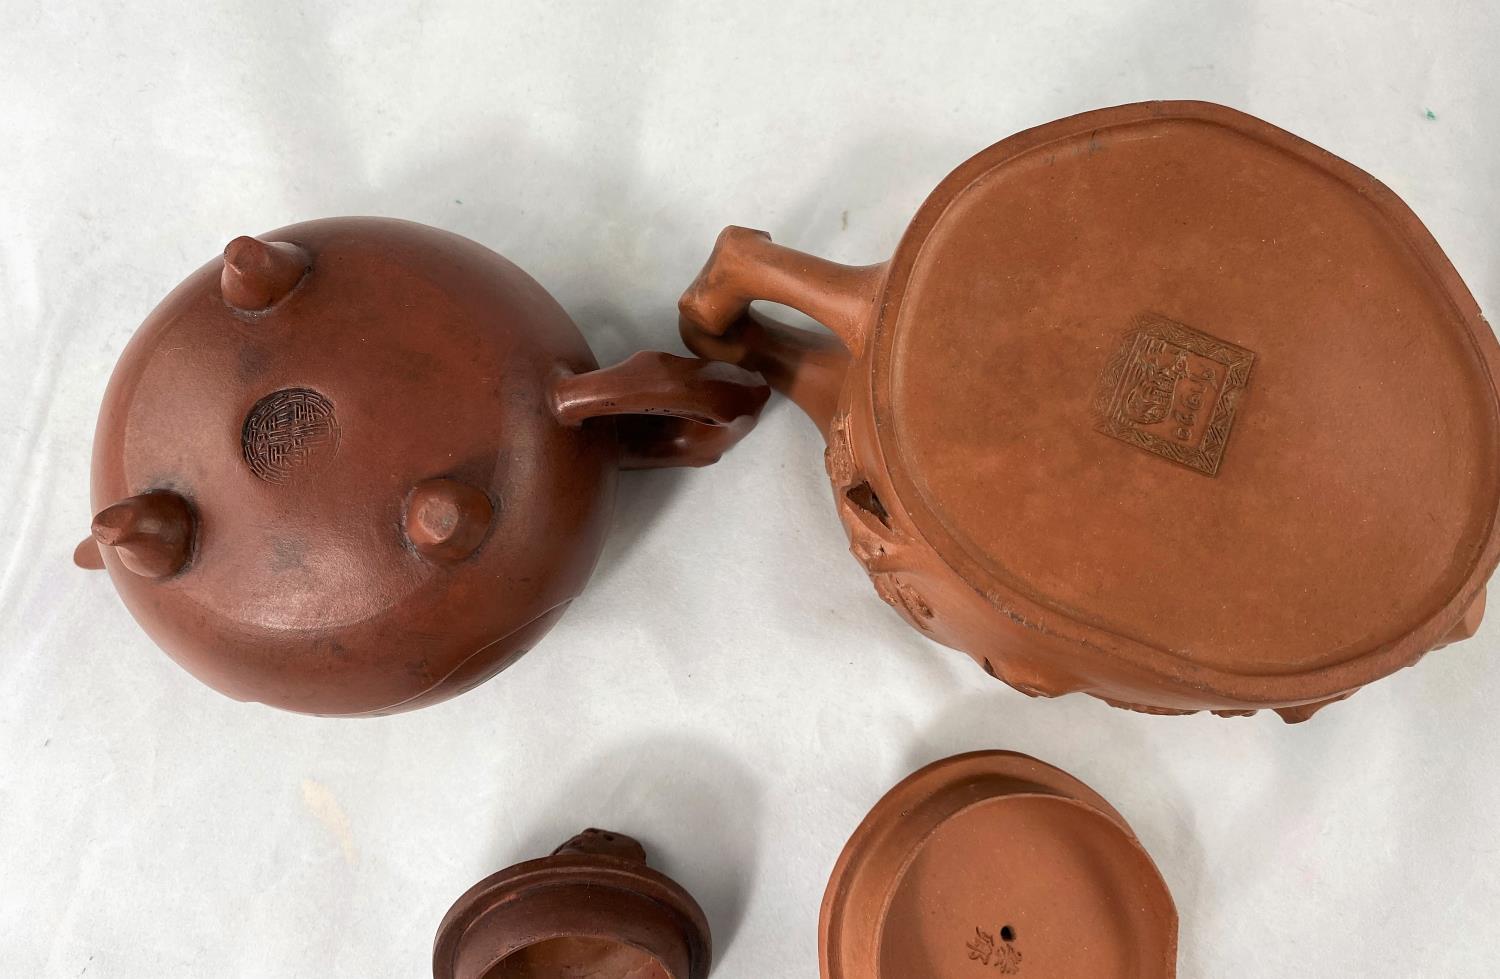 Two Yixing tea pots both with seal marks, 1 with character mark decoration, 1 with relief decoration - Image 4 of 4